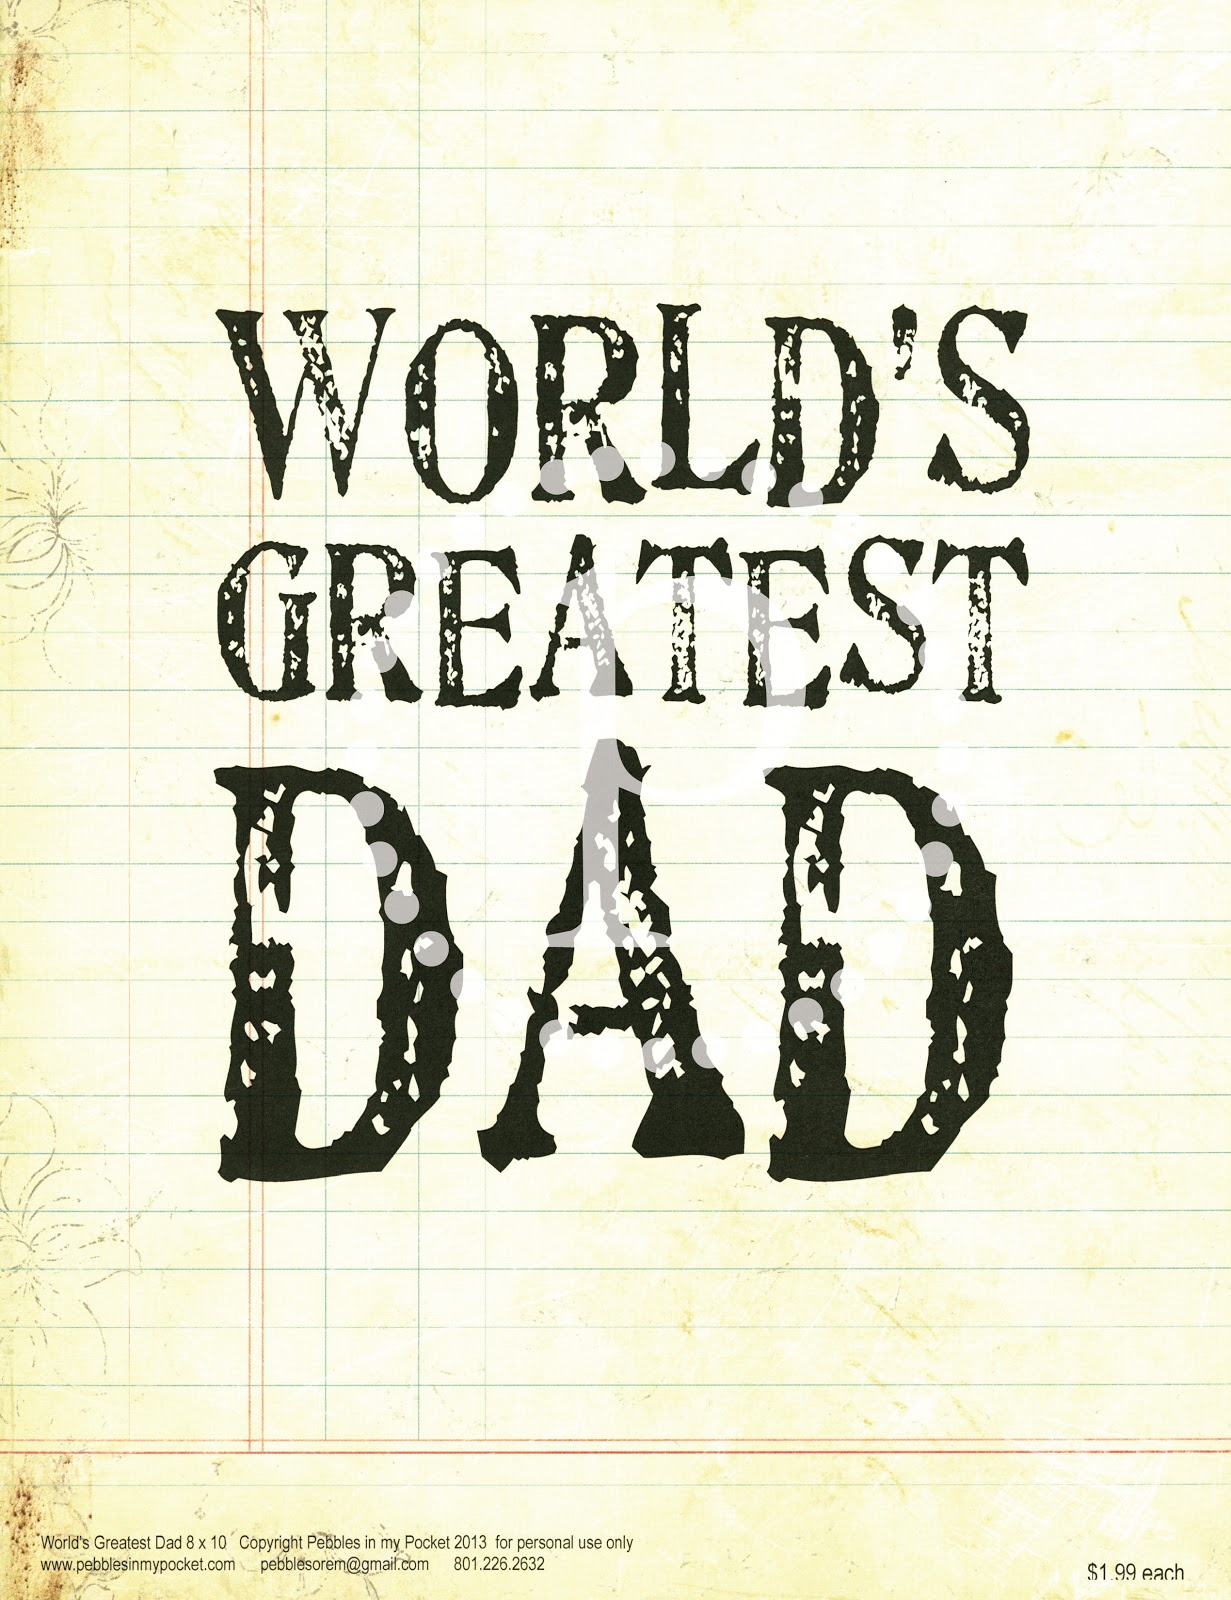 Fathers Day quotes. Hels Greatest dad. My dad is. Best dad!. Greatest dad lyrics